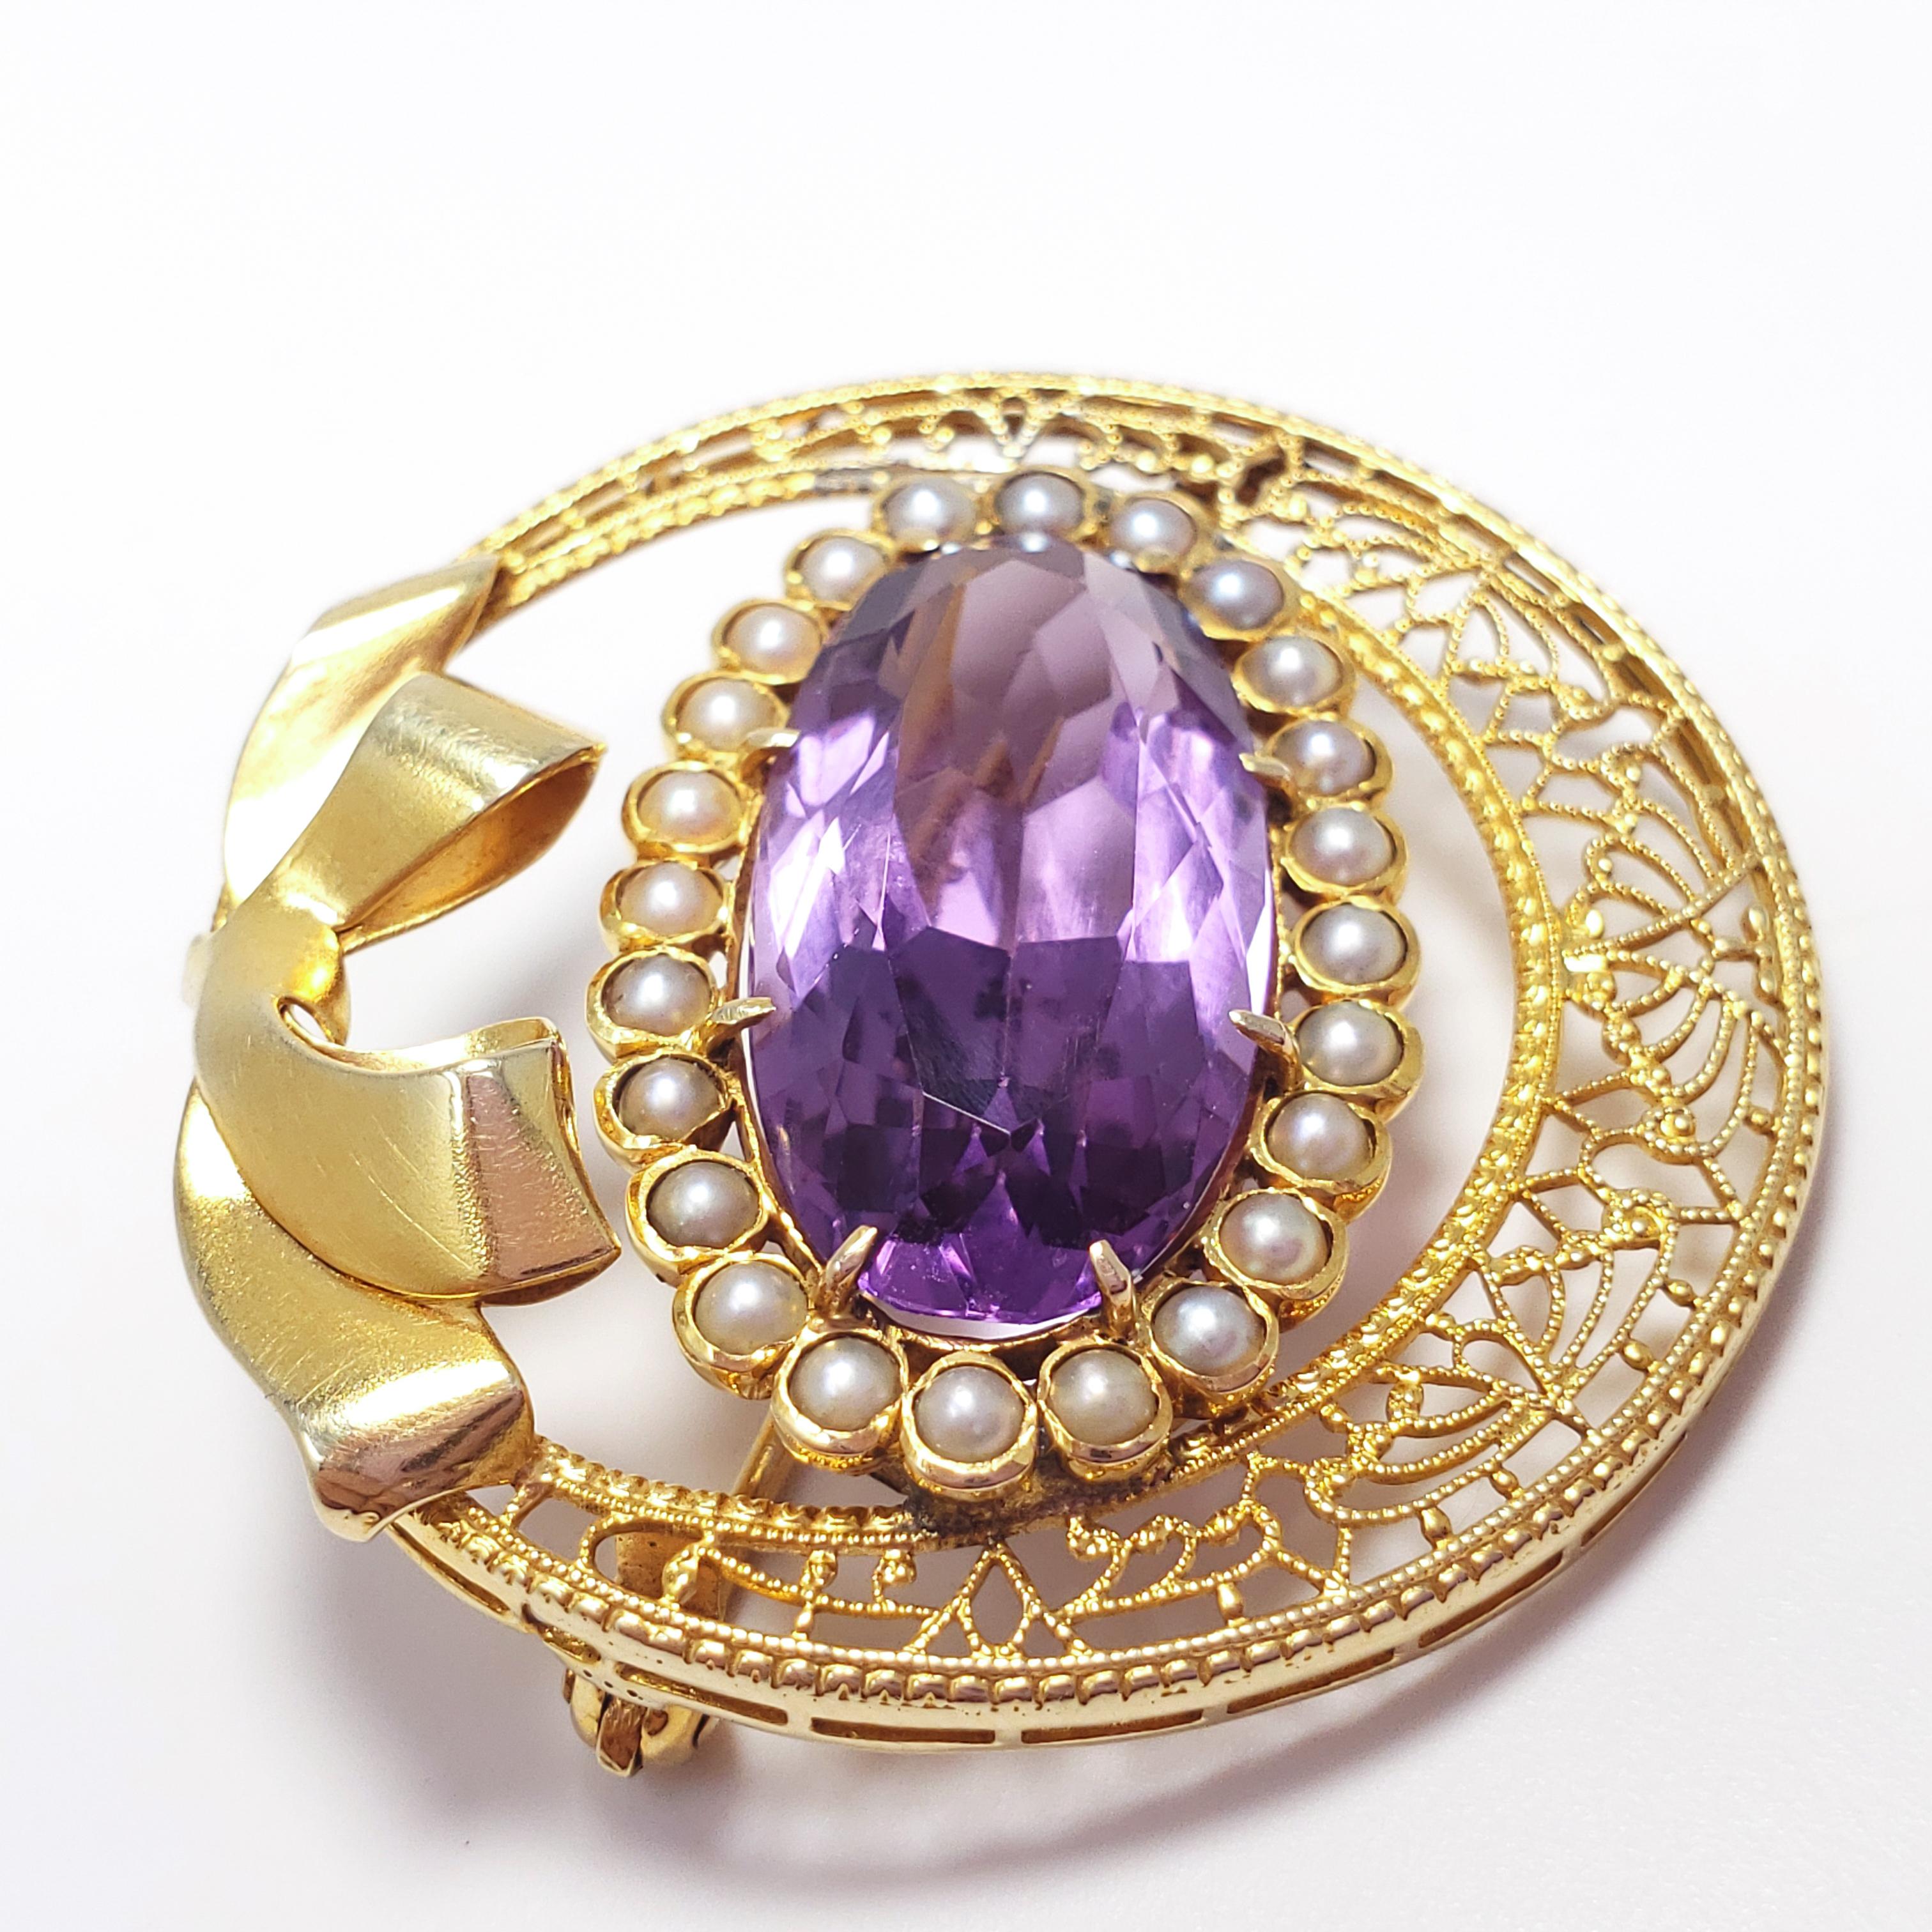 A dainty Victorian brooch for the most elegant woman! A single prong-set faceted amethyst is surrounded by natural seeded pearls in round bezels. All set in a 14KT gold round filigree setting, accented with a bow motif. Made c. early 1900s. This